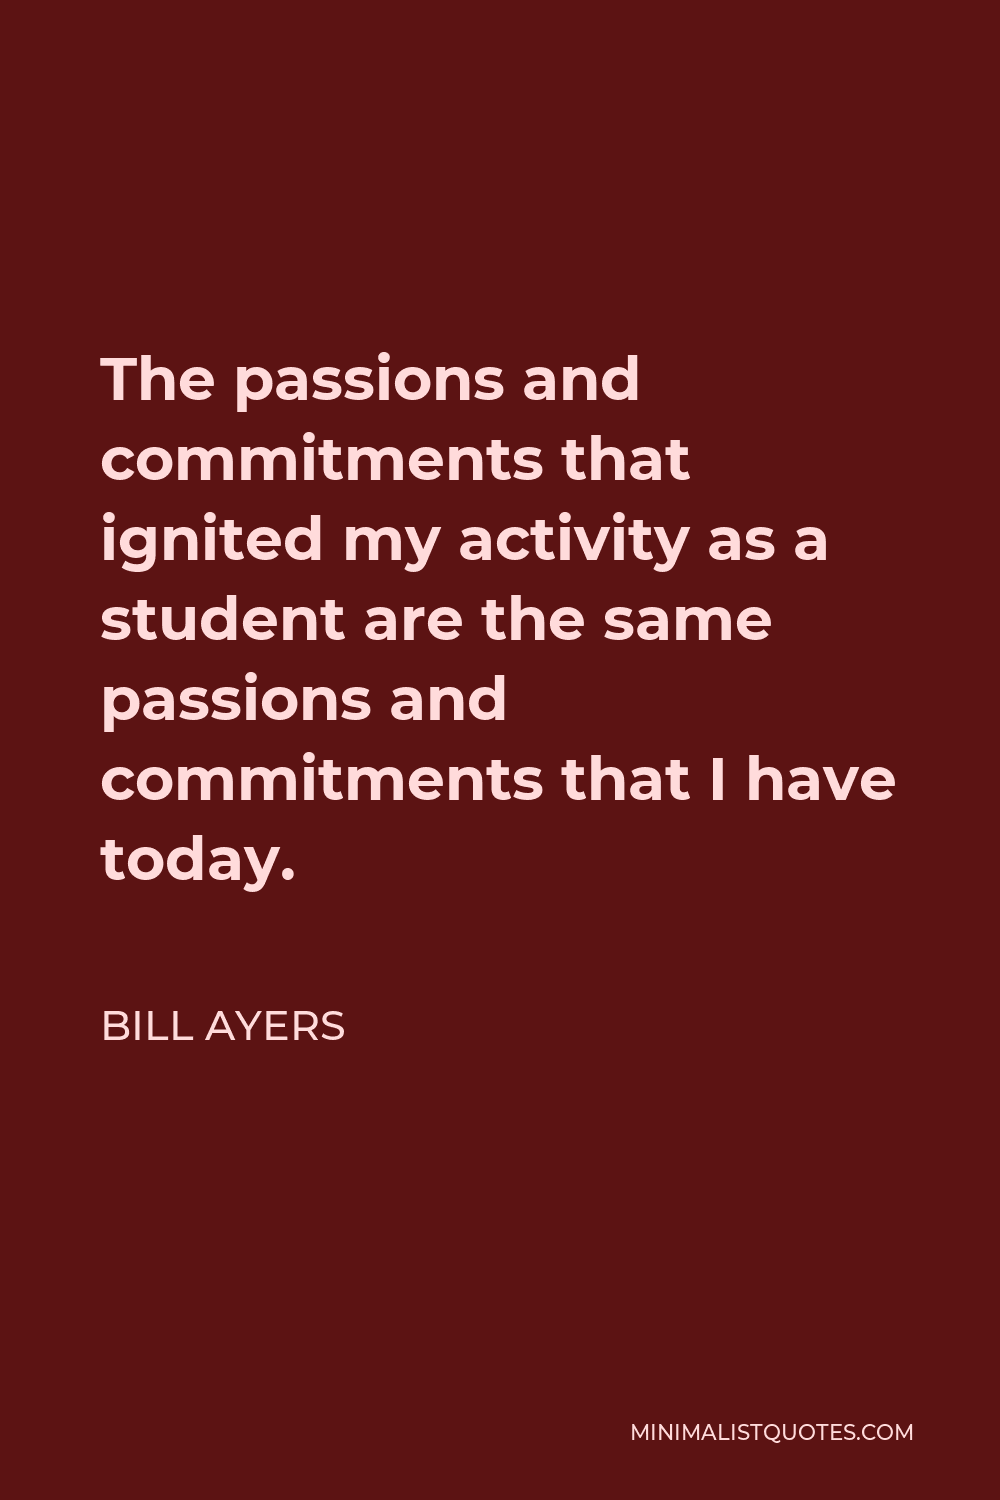 Bill Ayers Quote - The passions and commitments that ignited my activity as a student are the same passions and commitments that I have today.